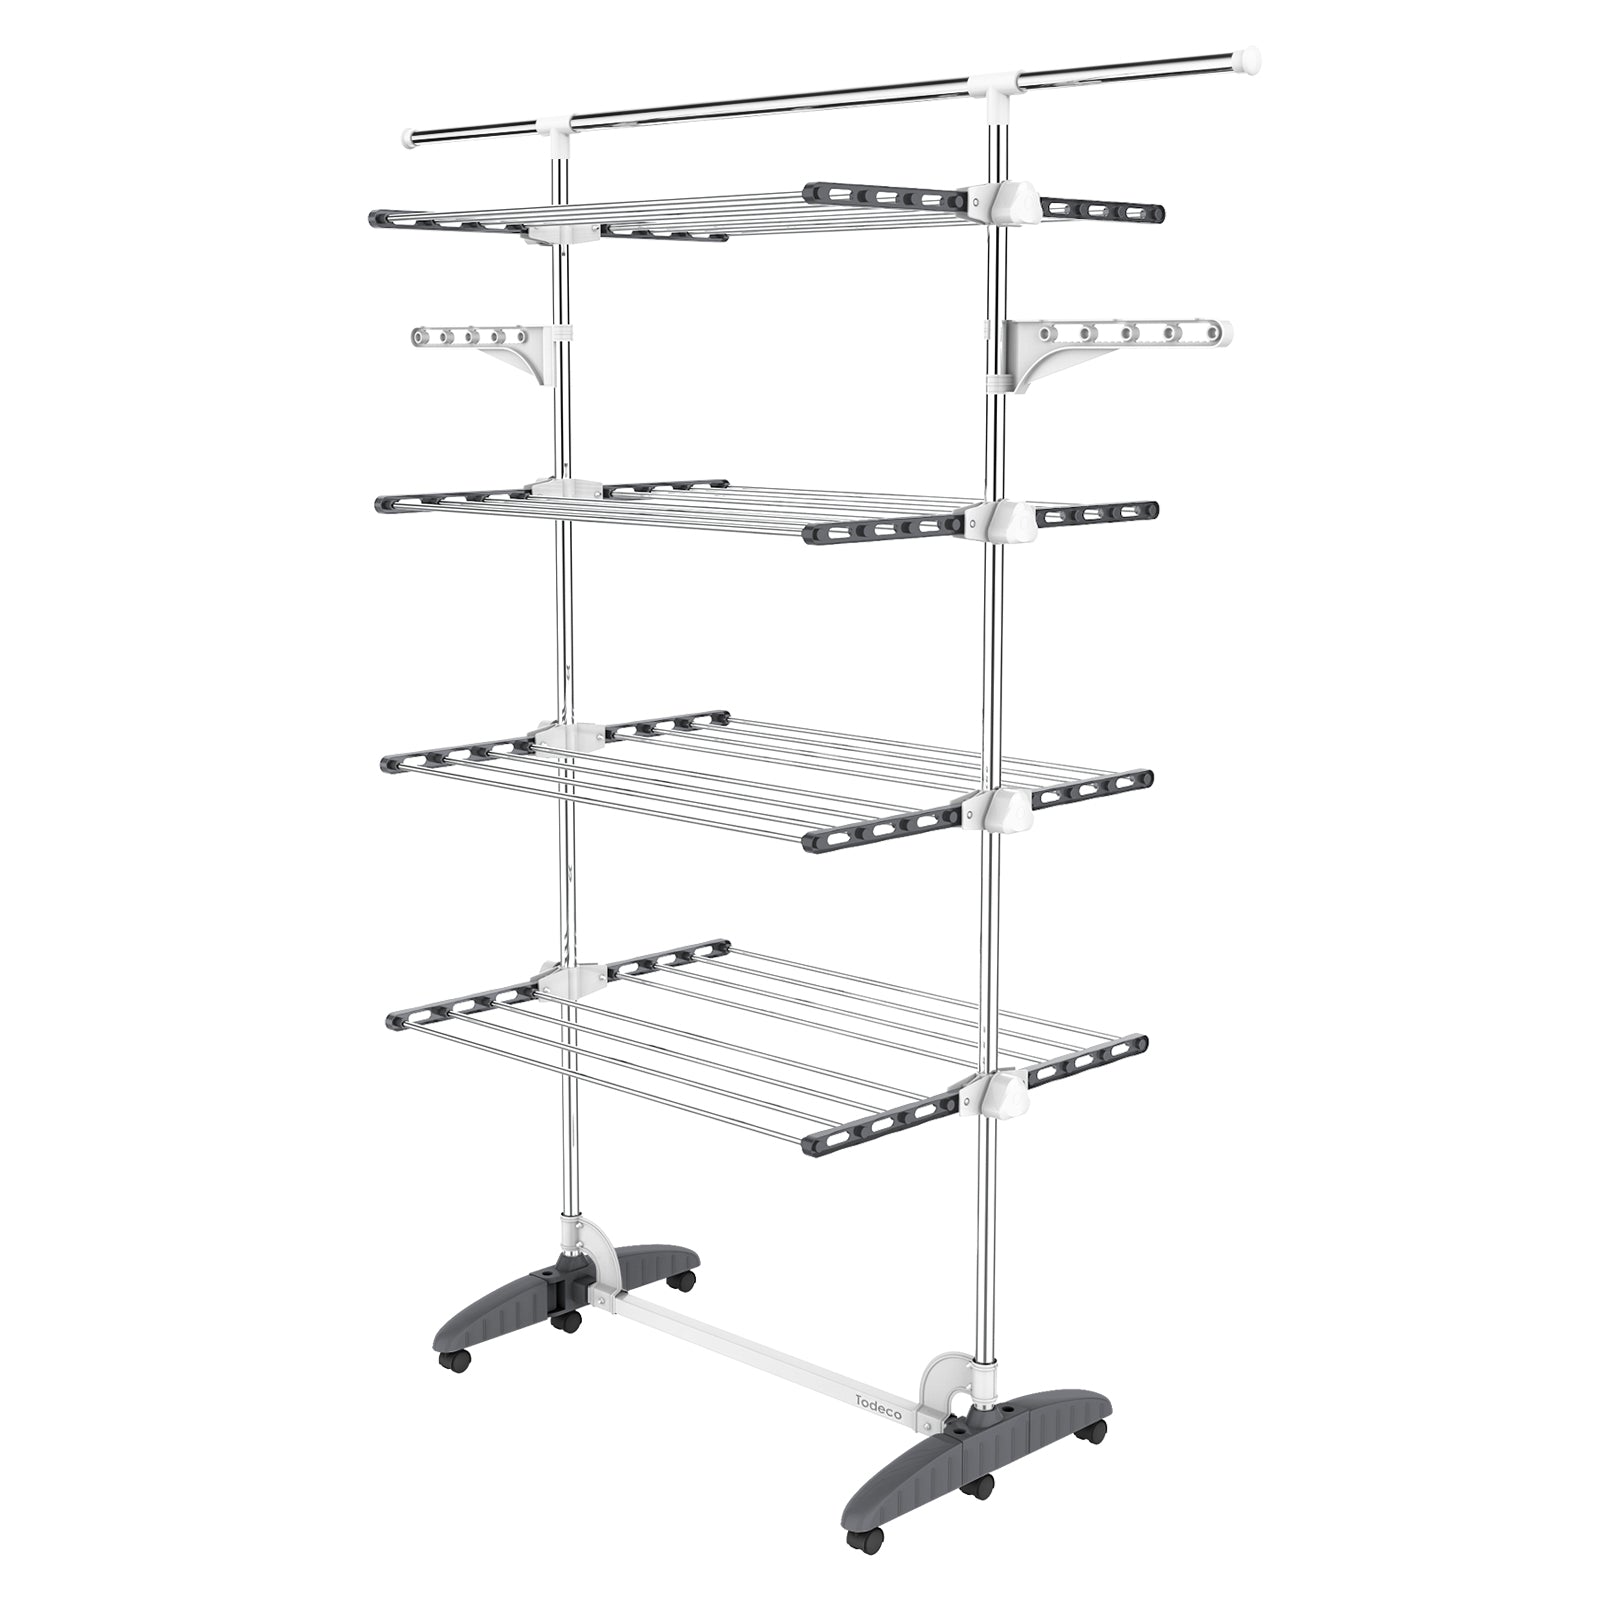 Clothes Drying Rack, 4 shelves (wings/extended top bar, Grey/White)